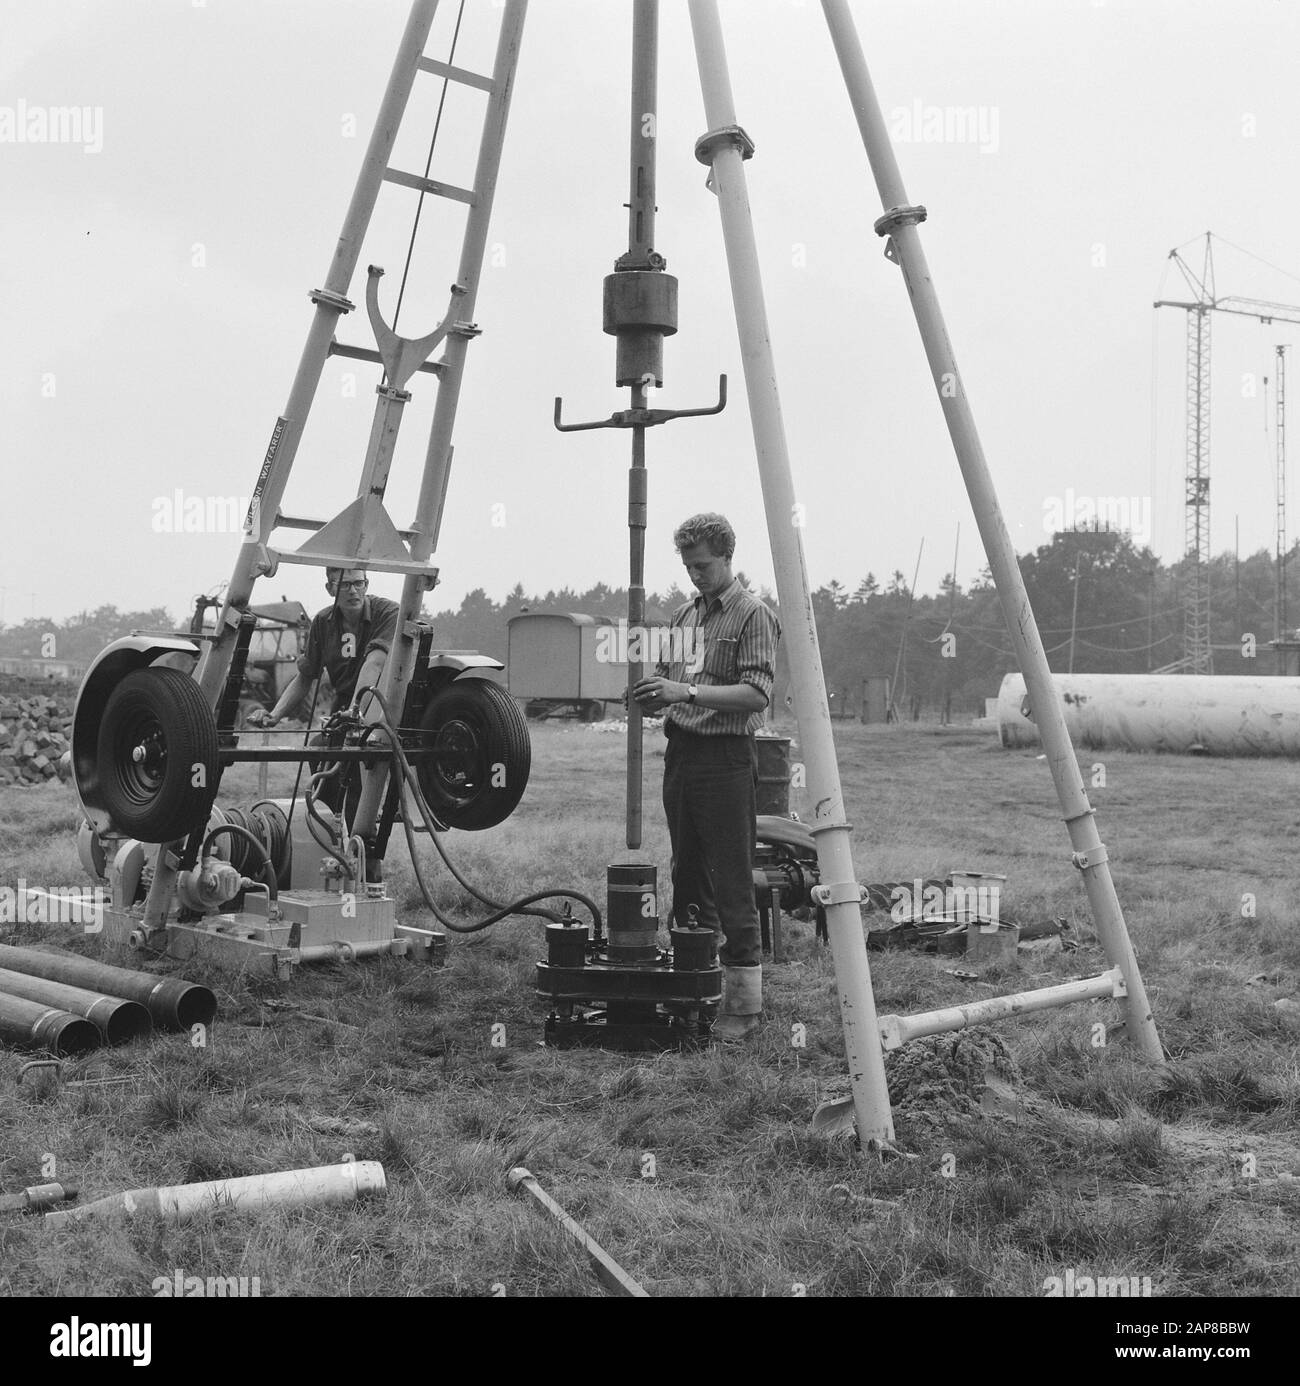 deep-ground drilling rigs, soil samples, percussion machines, pilcon Date: September 1967 Keywords: deep-ground drilling rigs, soil samples, percussion devices Personal name: pilcon Stock Photo